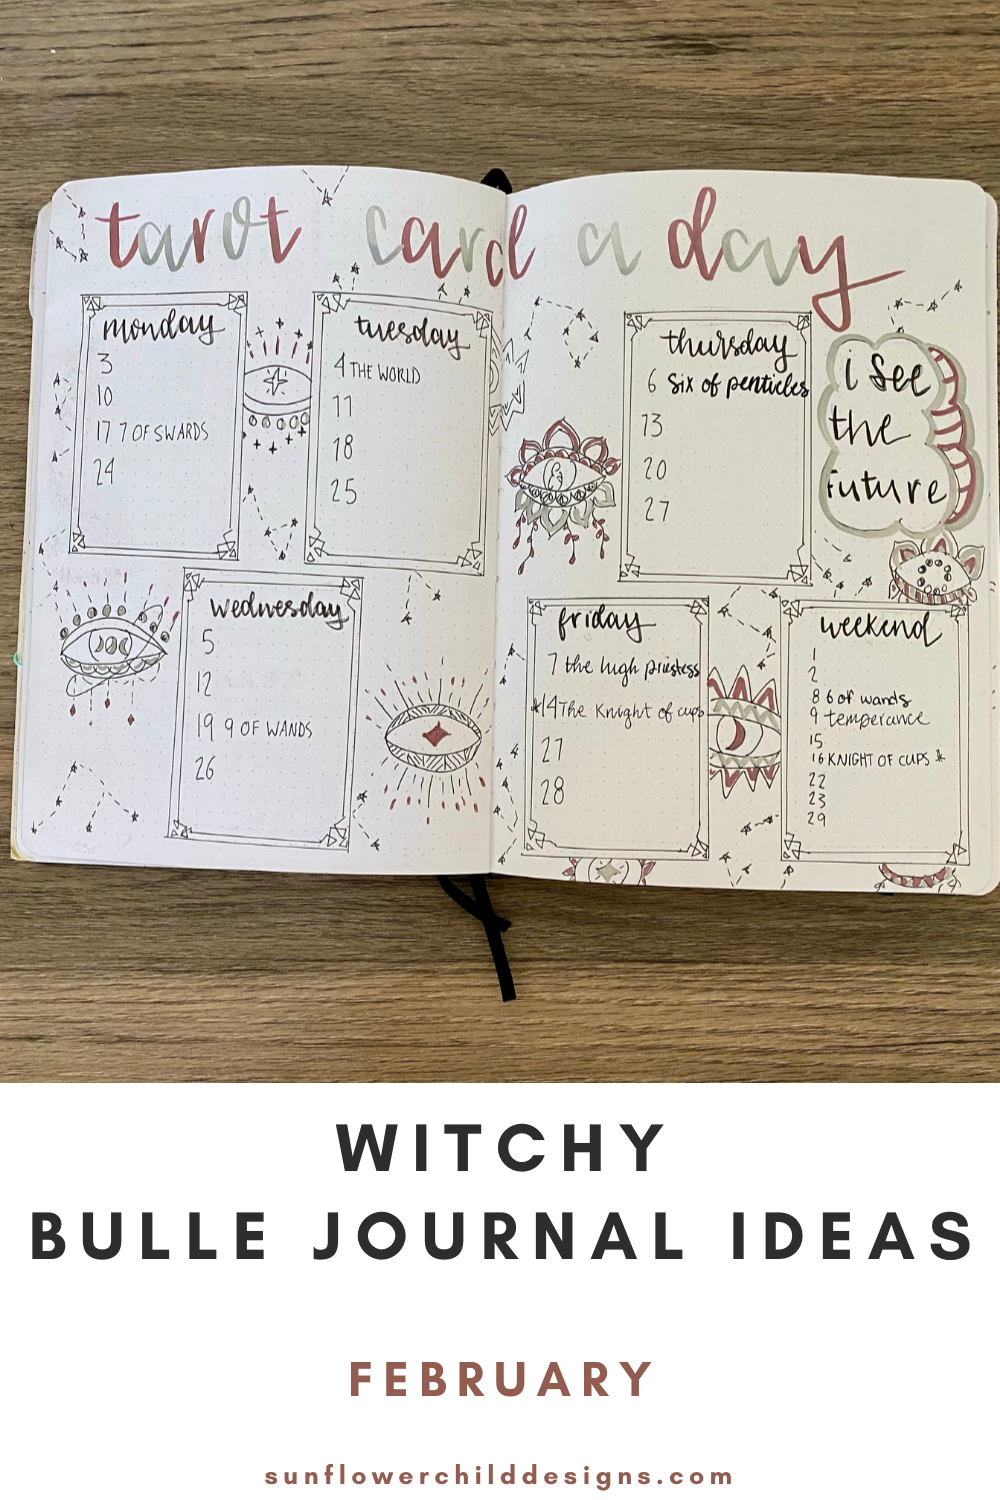 witchy-bullet-journal-ideas-february-bullet-journal-ideas 7.png